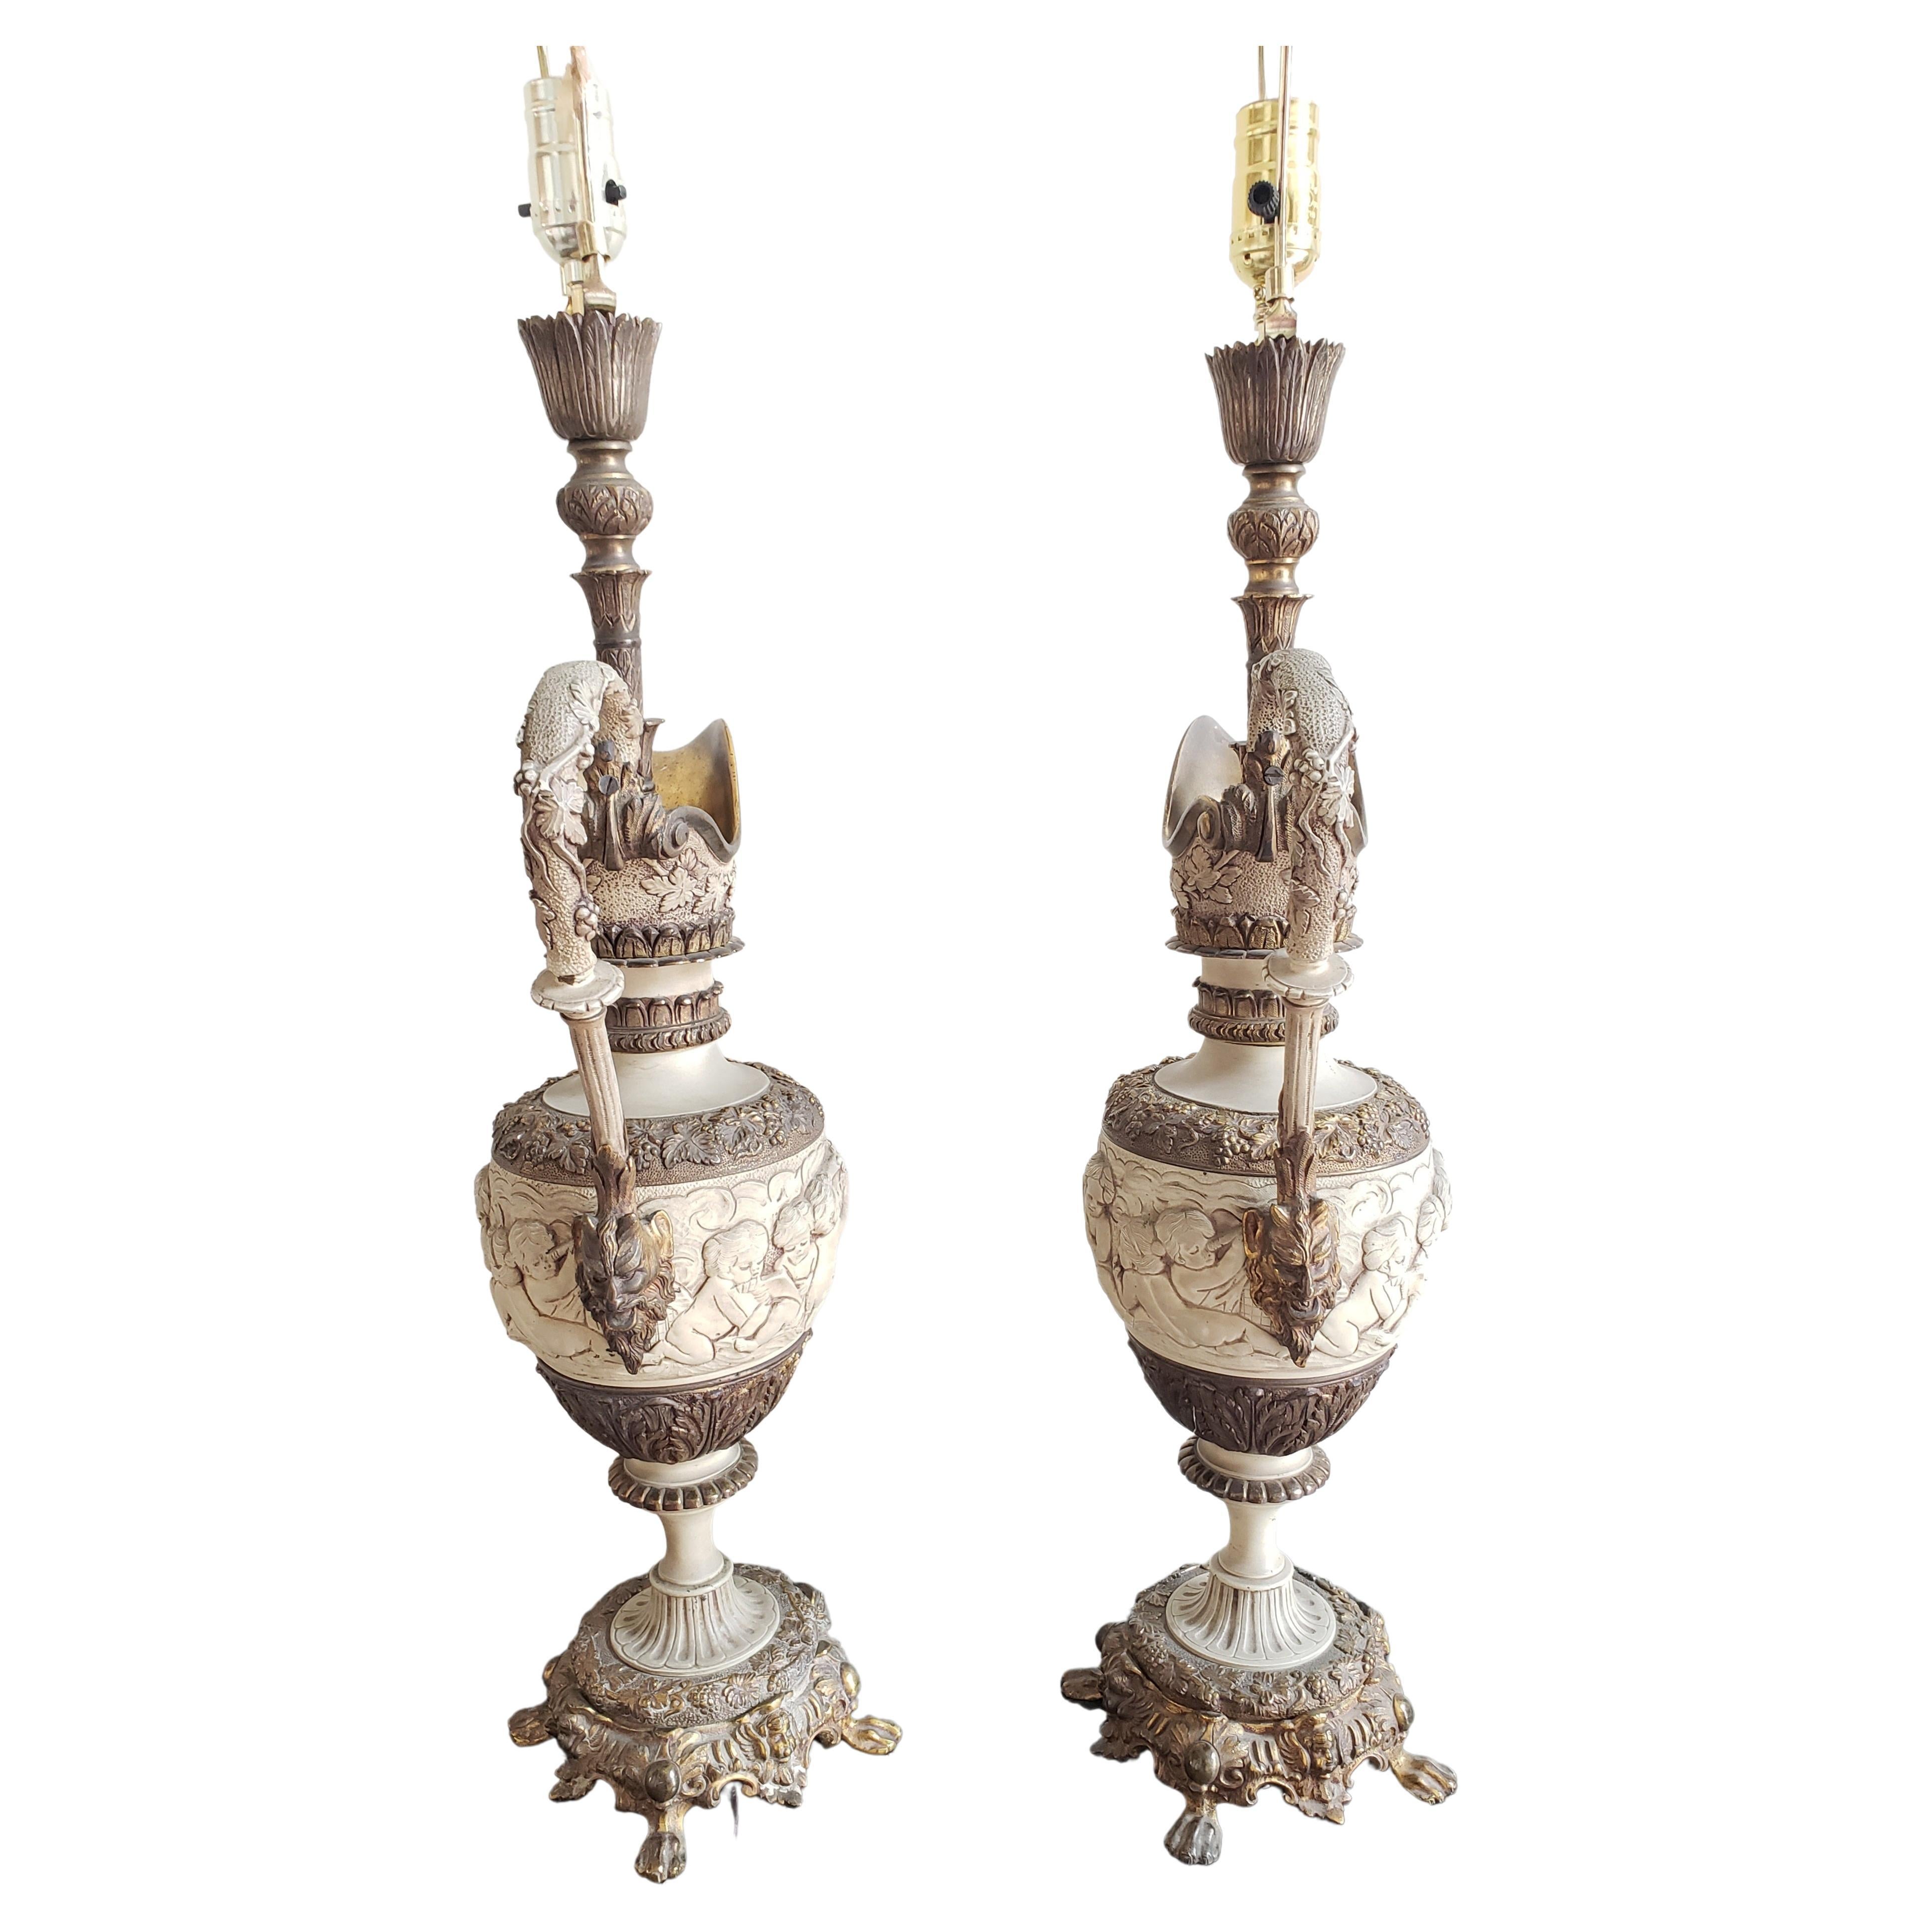 Pair of heavy bronze partial gilt table lamps in the form of ewers with paw feet, profusely worked. Richly bronze carving with cherubs throughout. Late 19th century in good vintage condition.
Measures 10.25